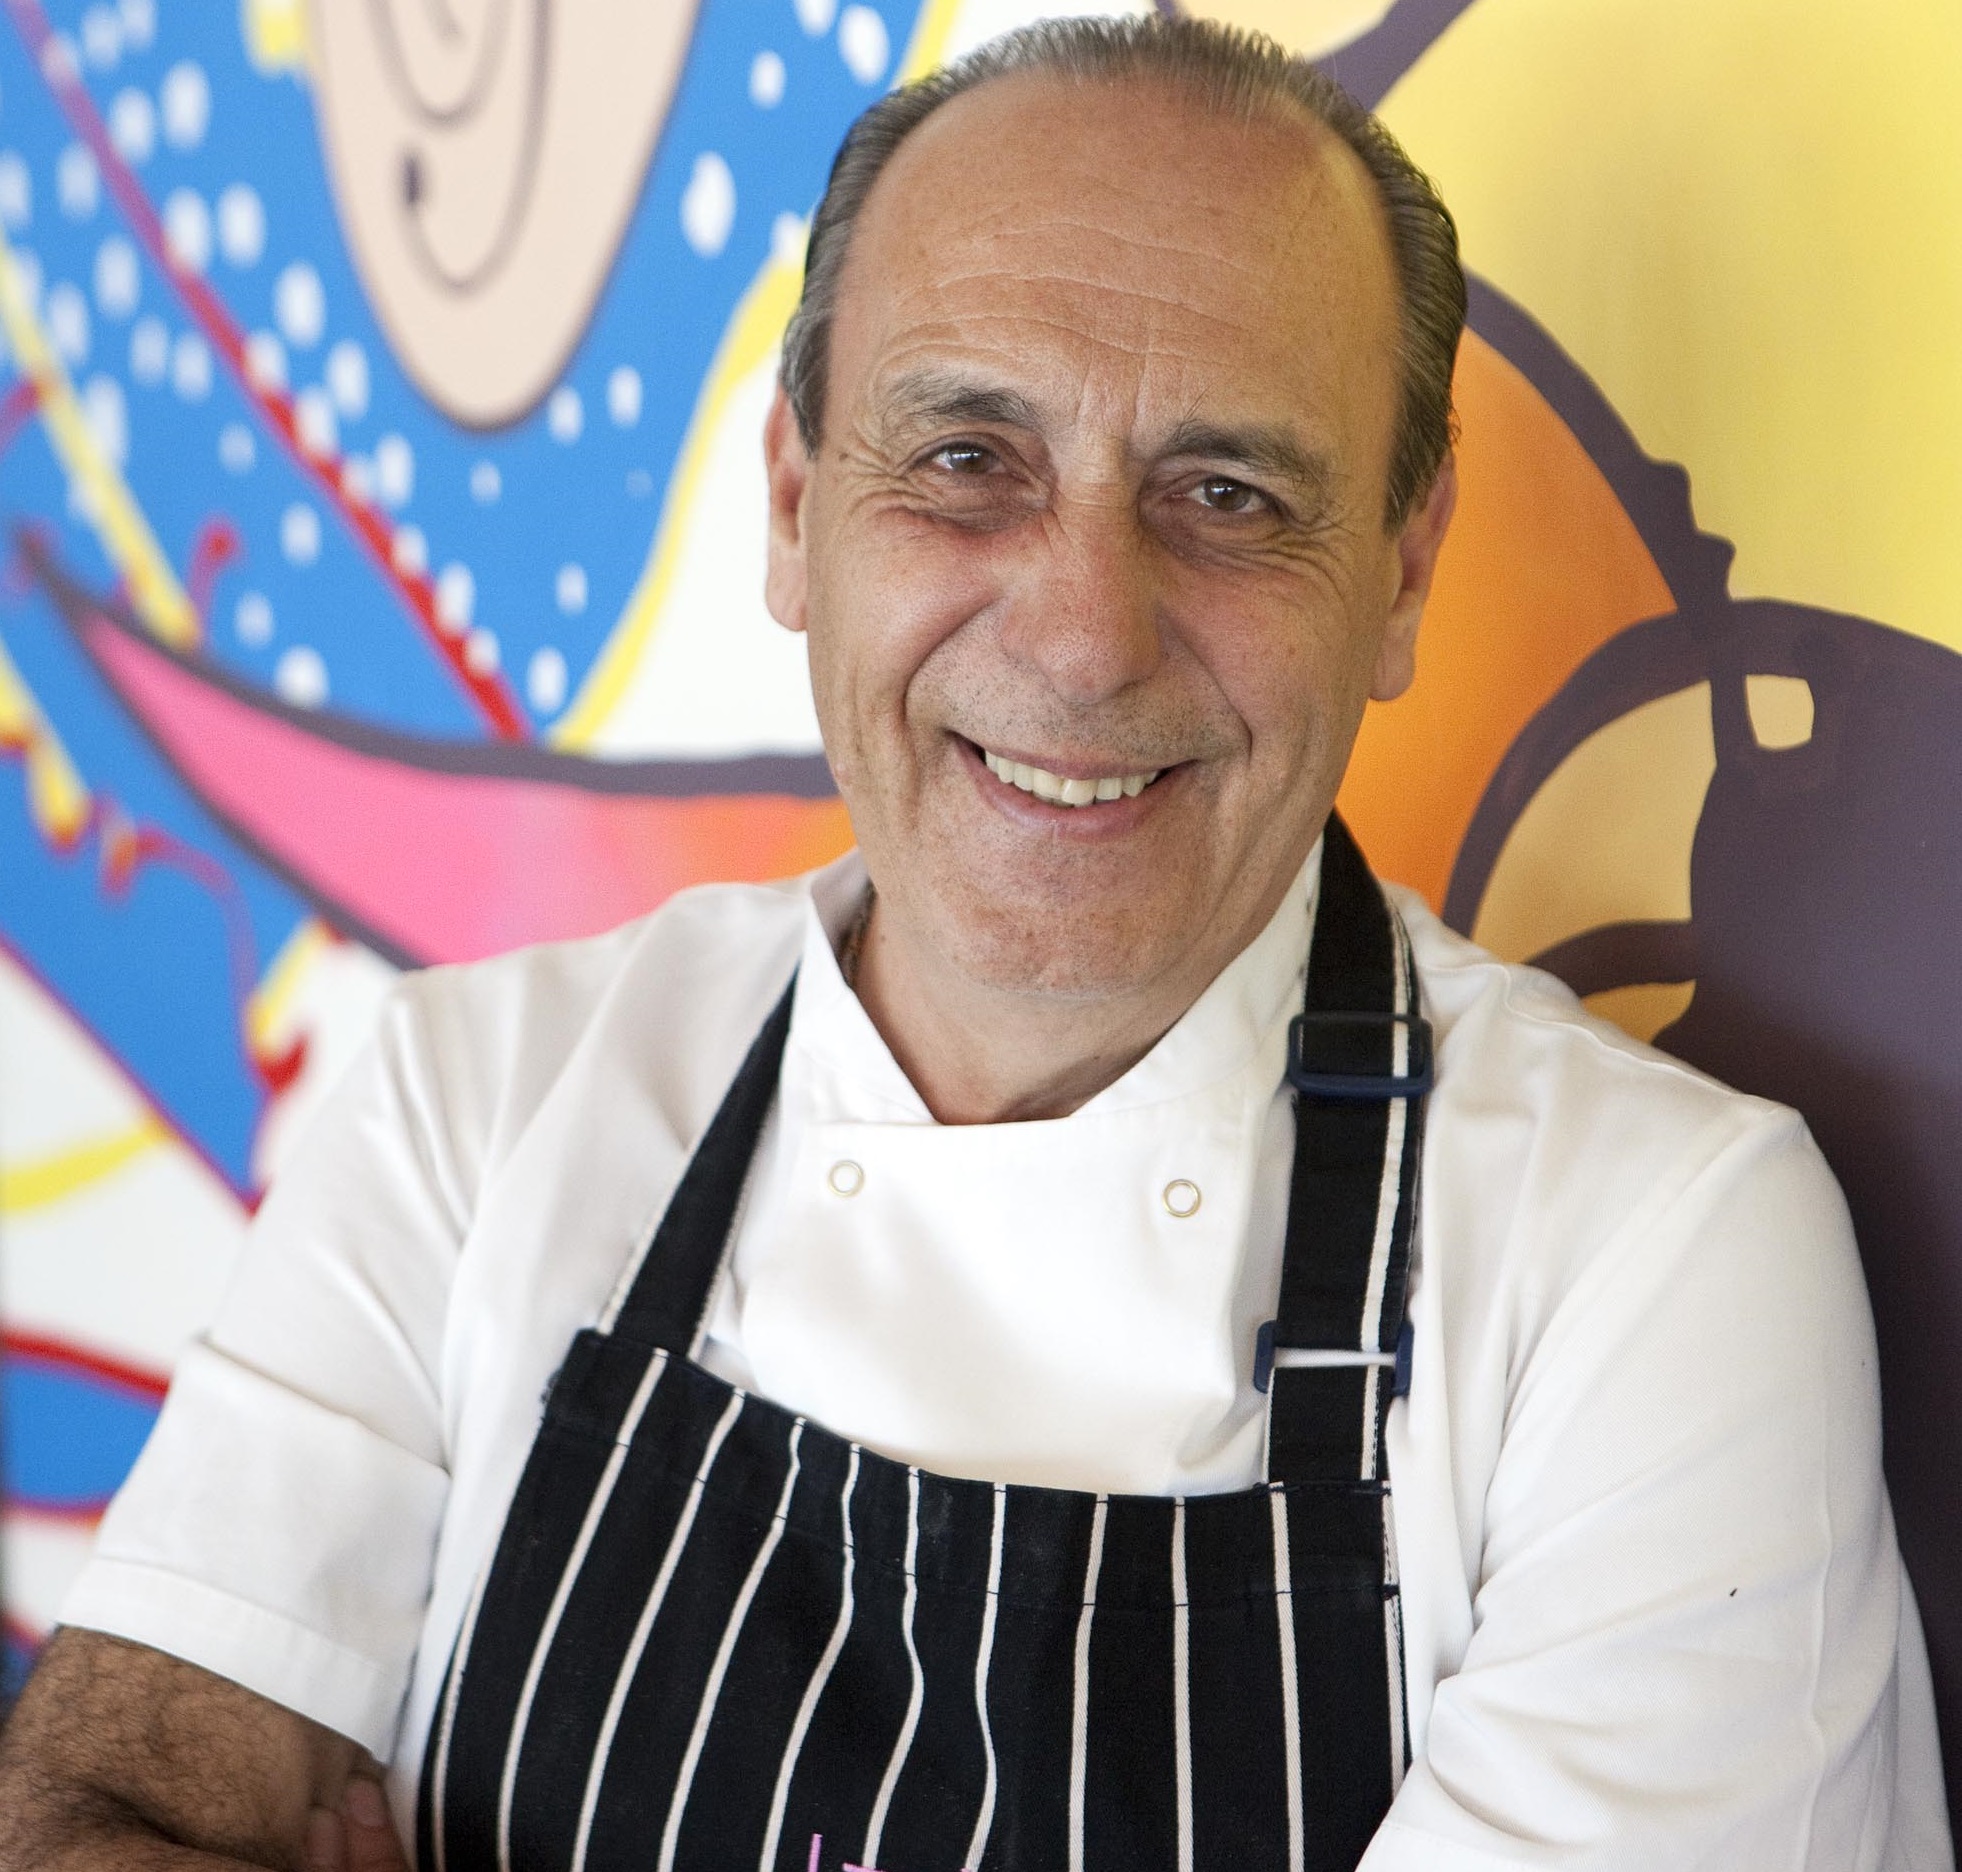 Delighted to welcome the UK's most loved Italian chef Gennaro Contaldo